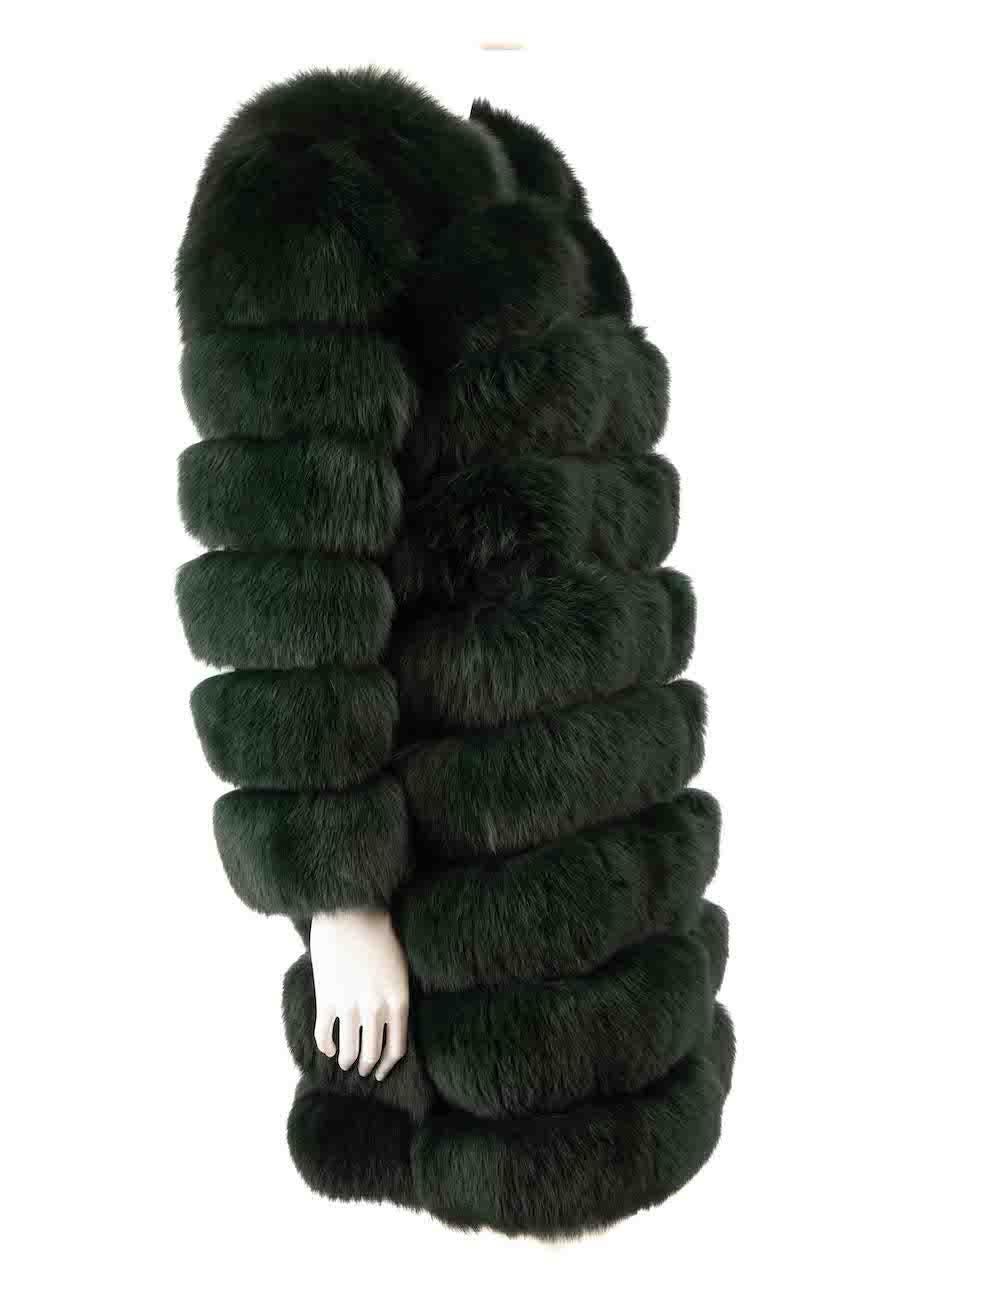 CONDITION is Very good. Minimal wear to coat is evident. Minimal wear to pockets with small rips on the seam on this useddesigner resale item.
 
 
 
 Details
 
 
 Green
 
 Fur
 
 Coat
 
 Hook fastening
 
 2x Side pockets
 
 
 
 
 
 
 
 Composition
